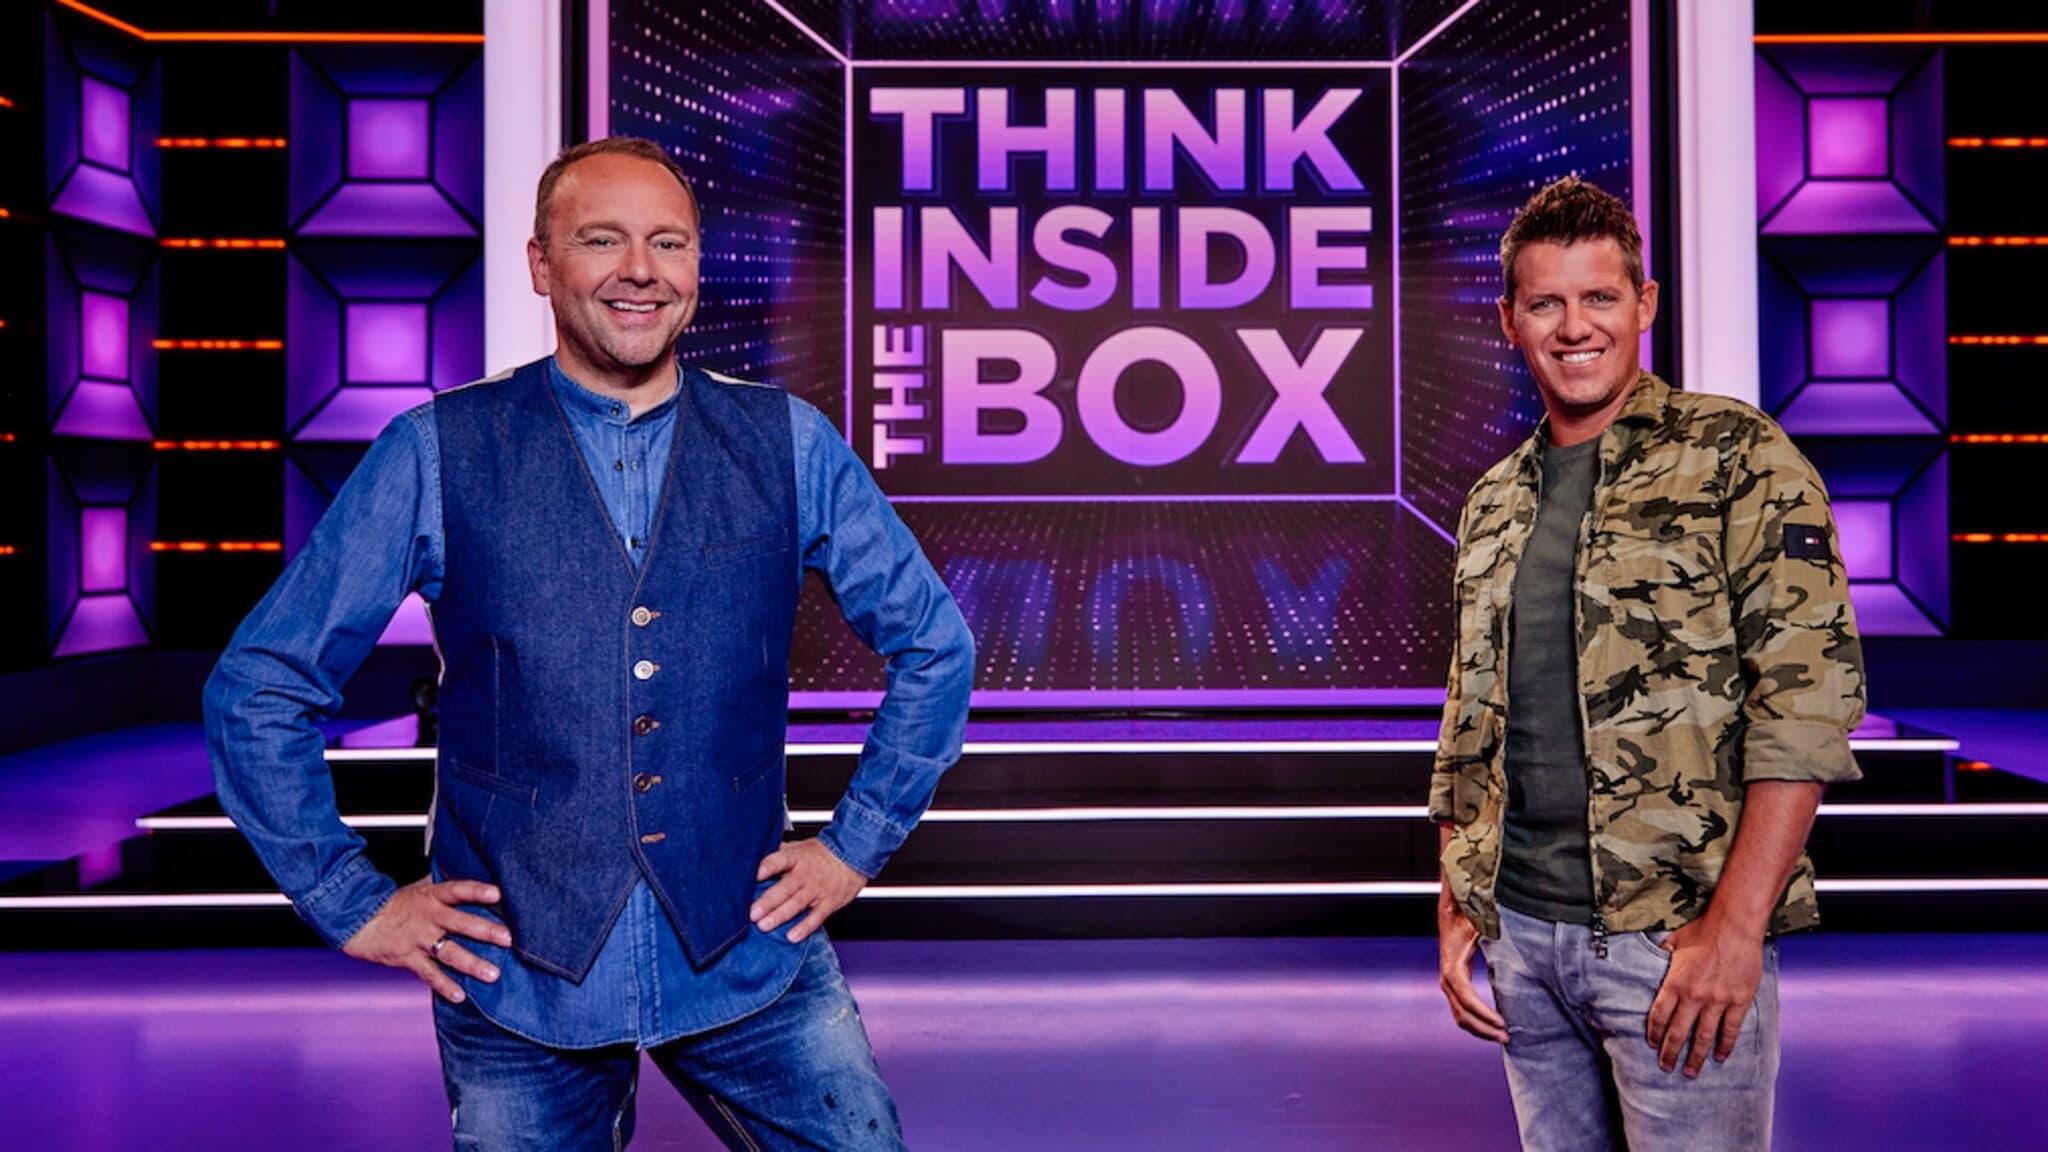 Think Inside The Box backdrop